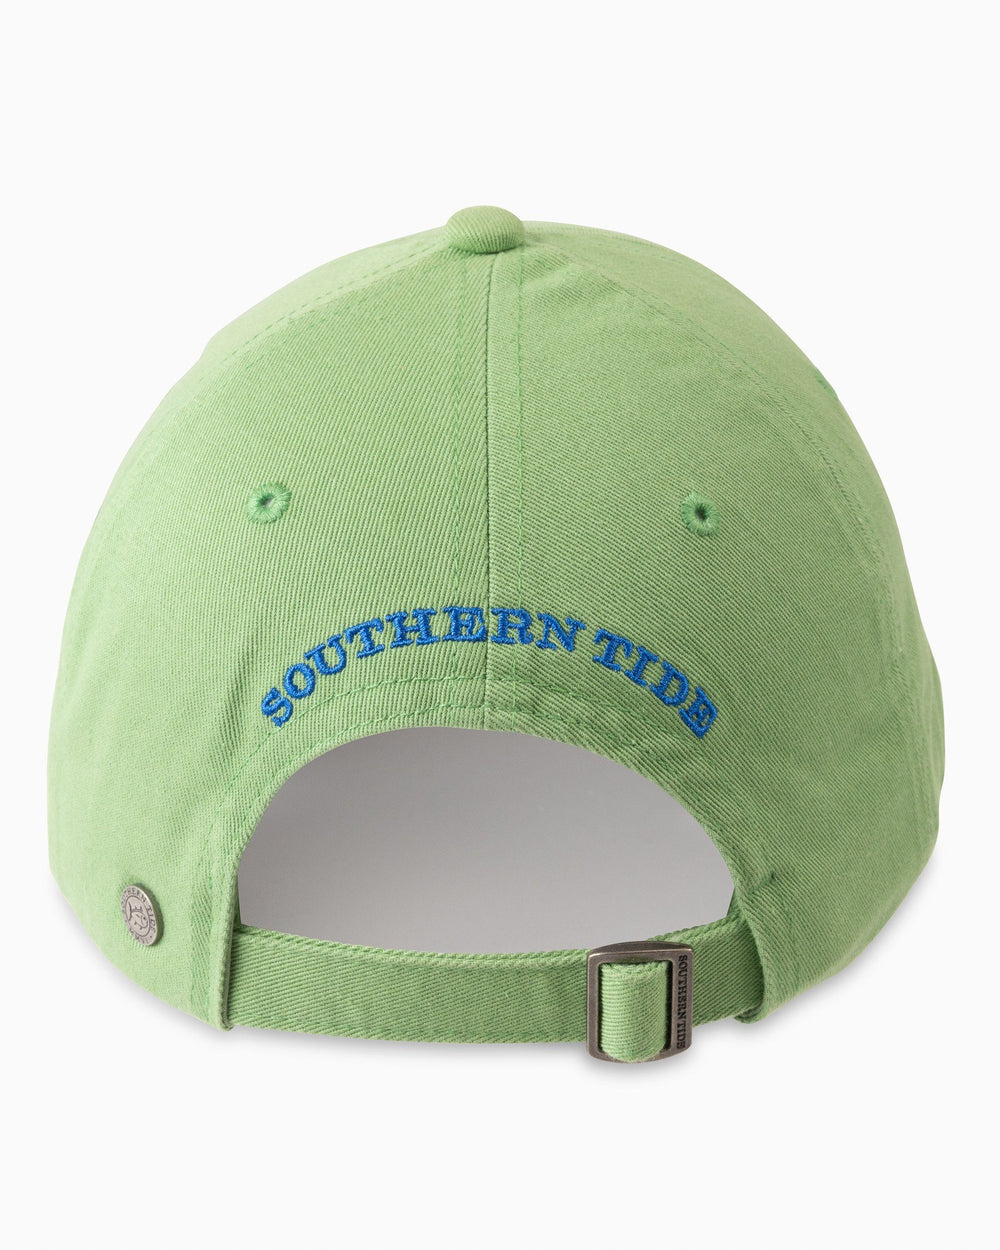 The back of the Skipjack Hat by Southern Tide - Bay Leaf Green